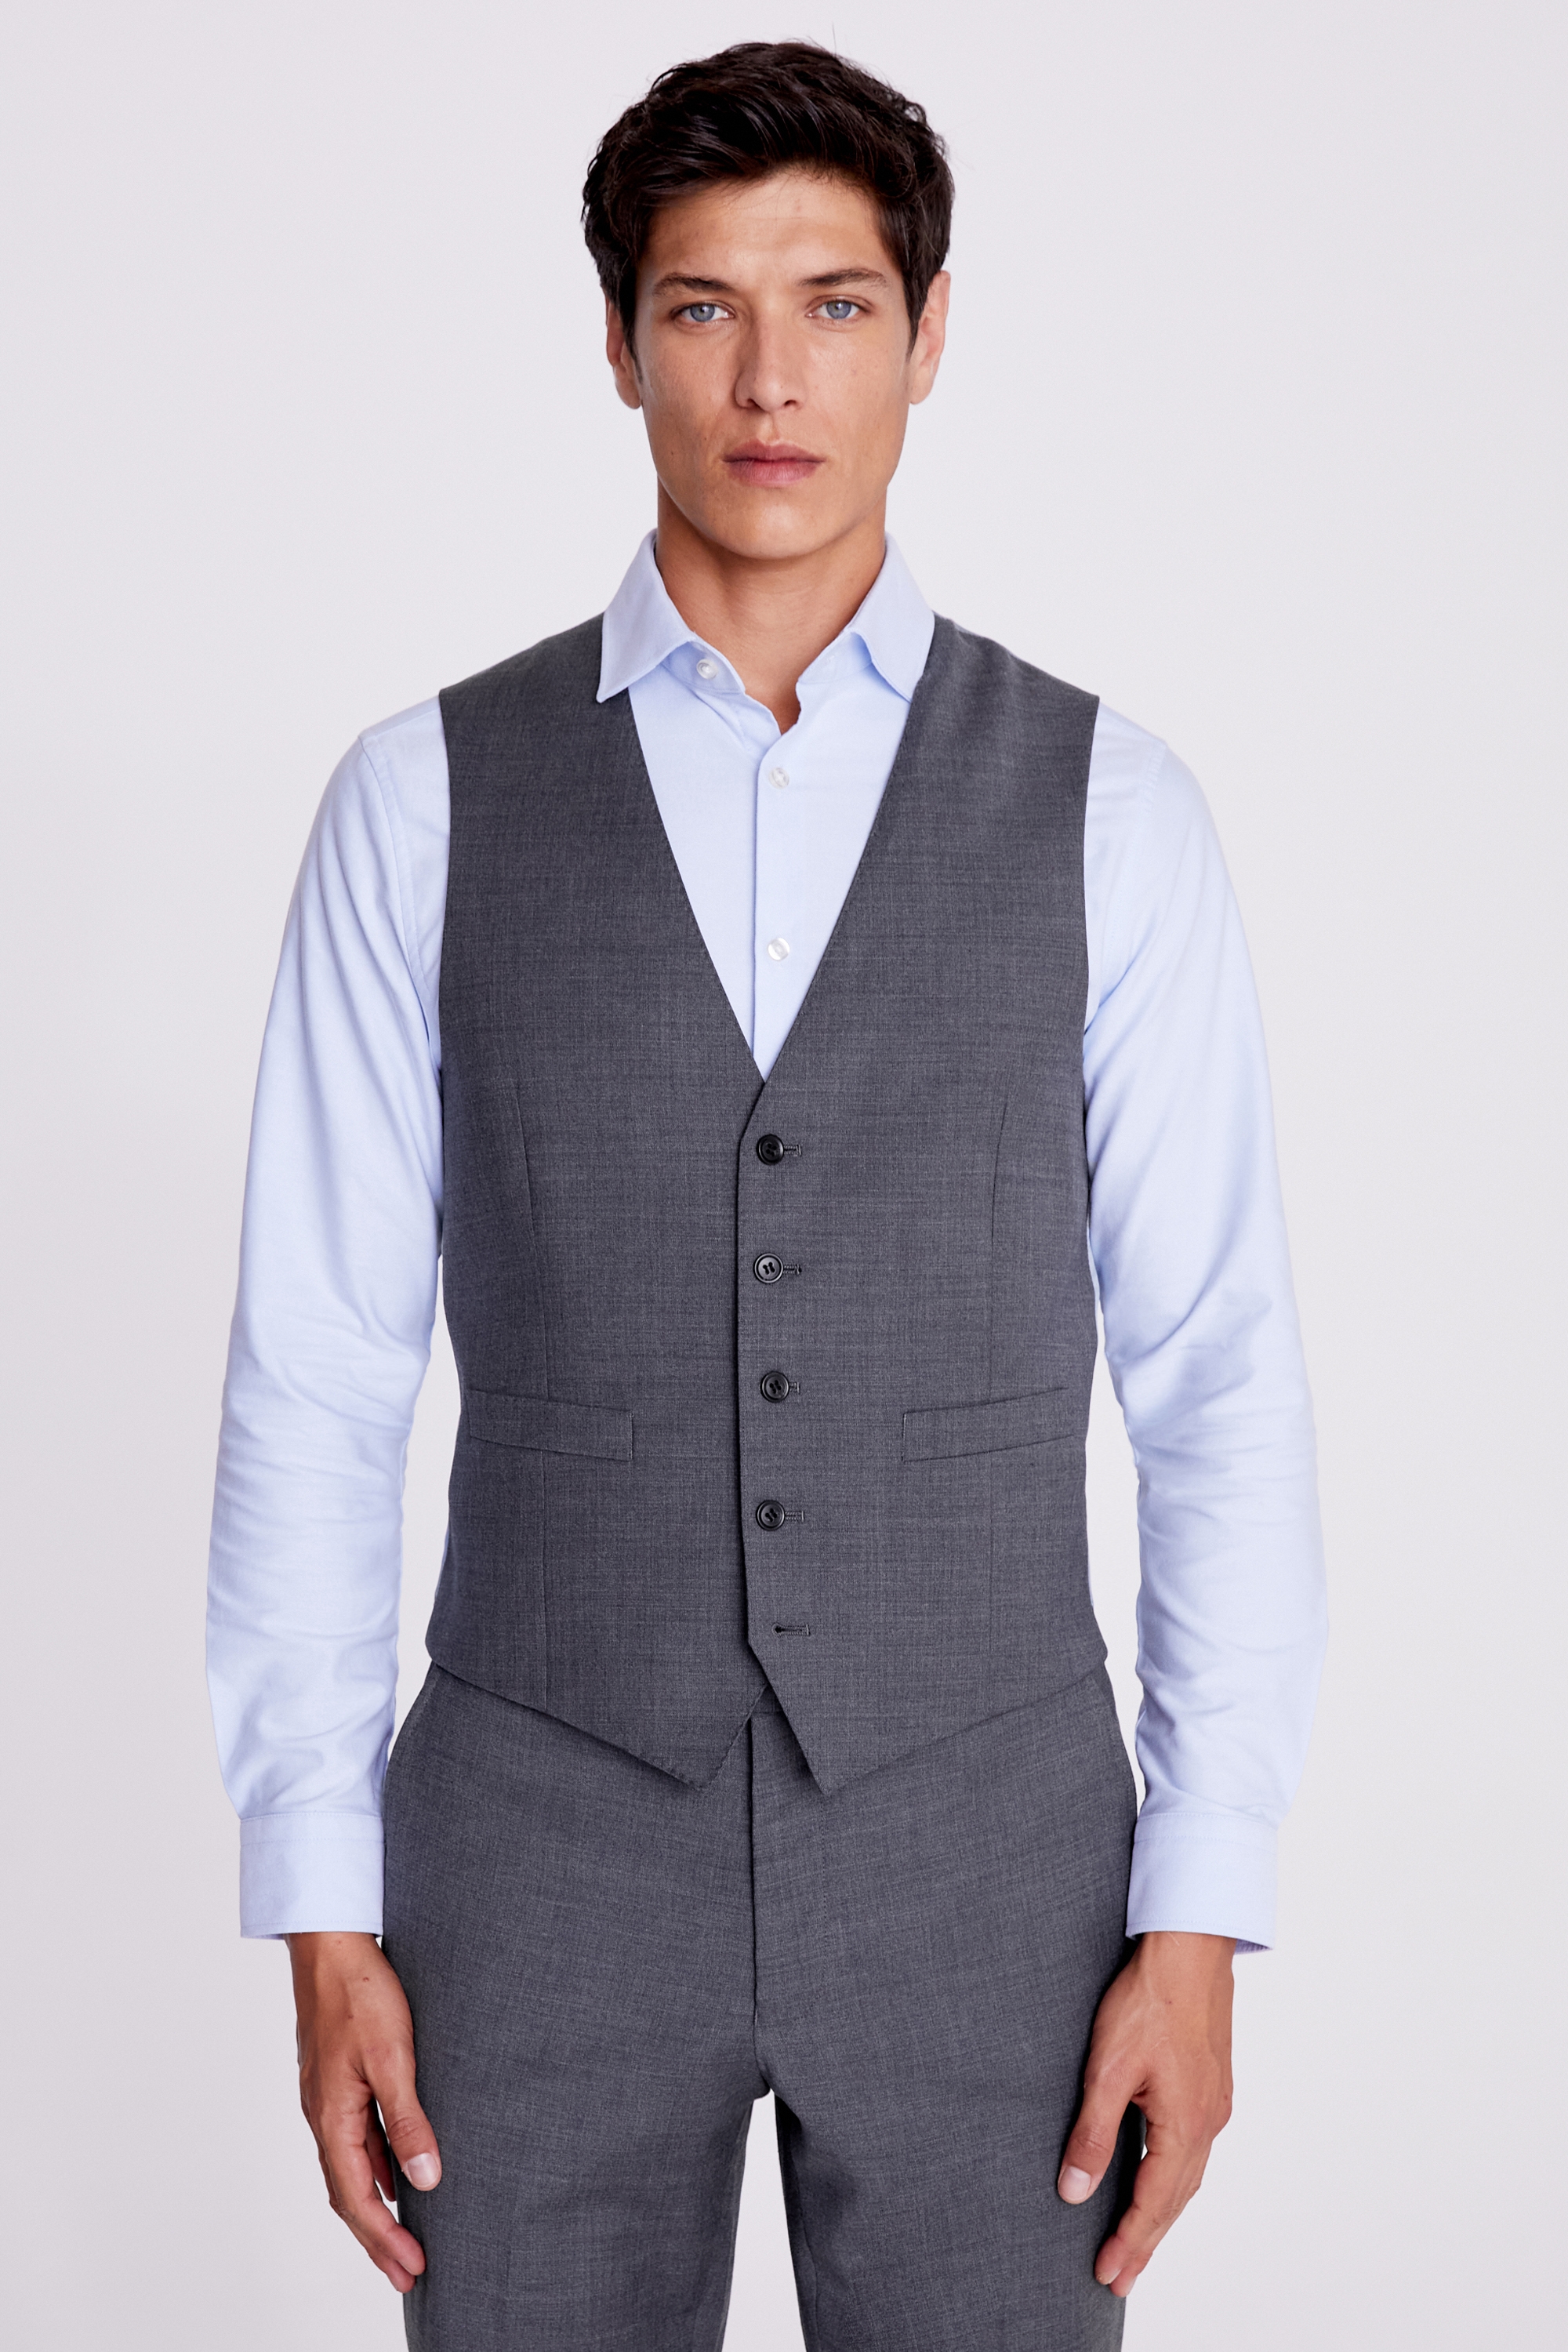 Tailored Fit Grey Twill Waistcoat | Buy Online at Moss